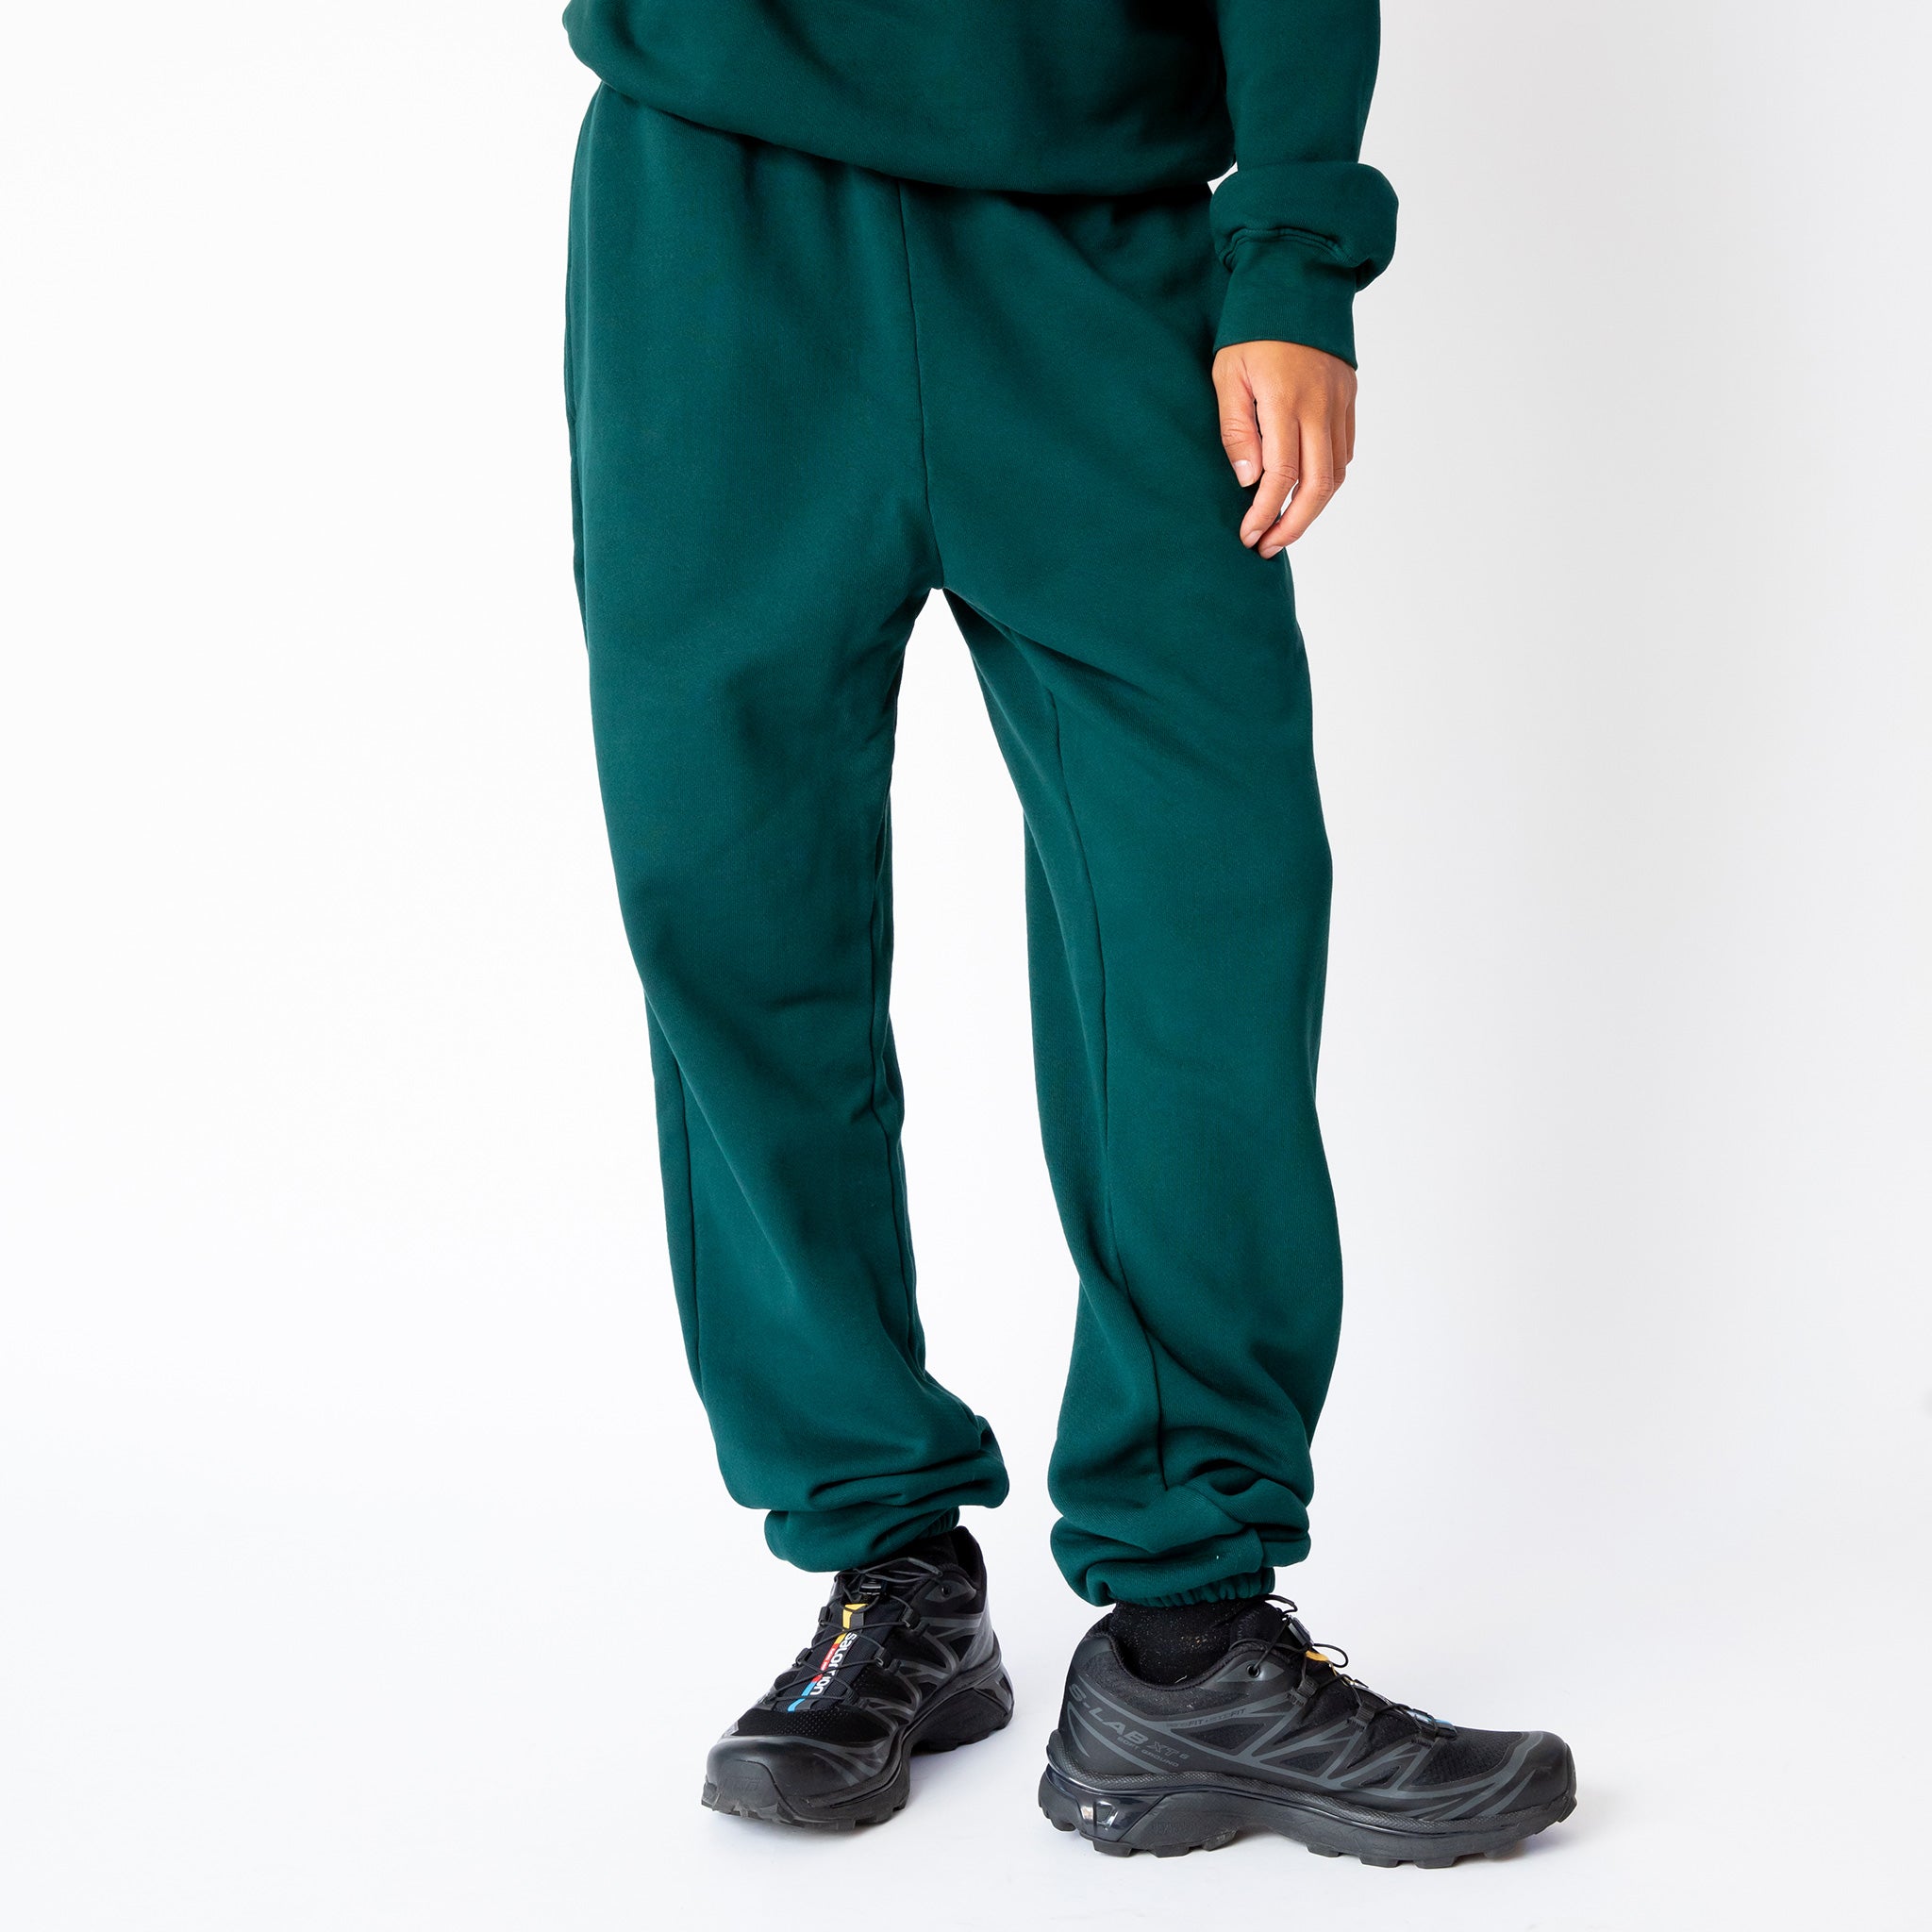 A model wears the classic sweatpant by Les Tien in an emerald green color - front view.